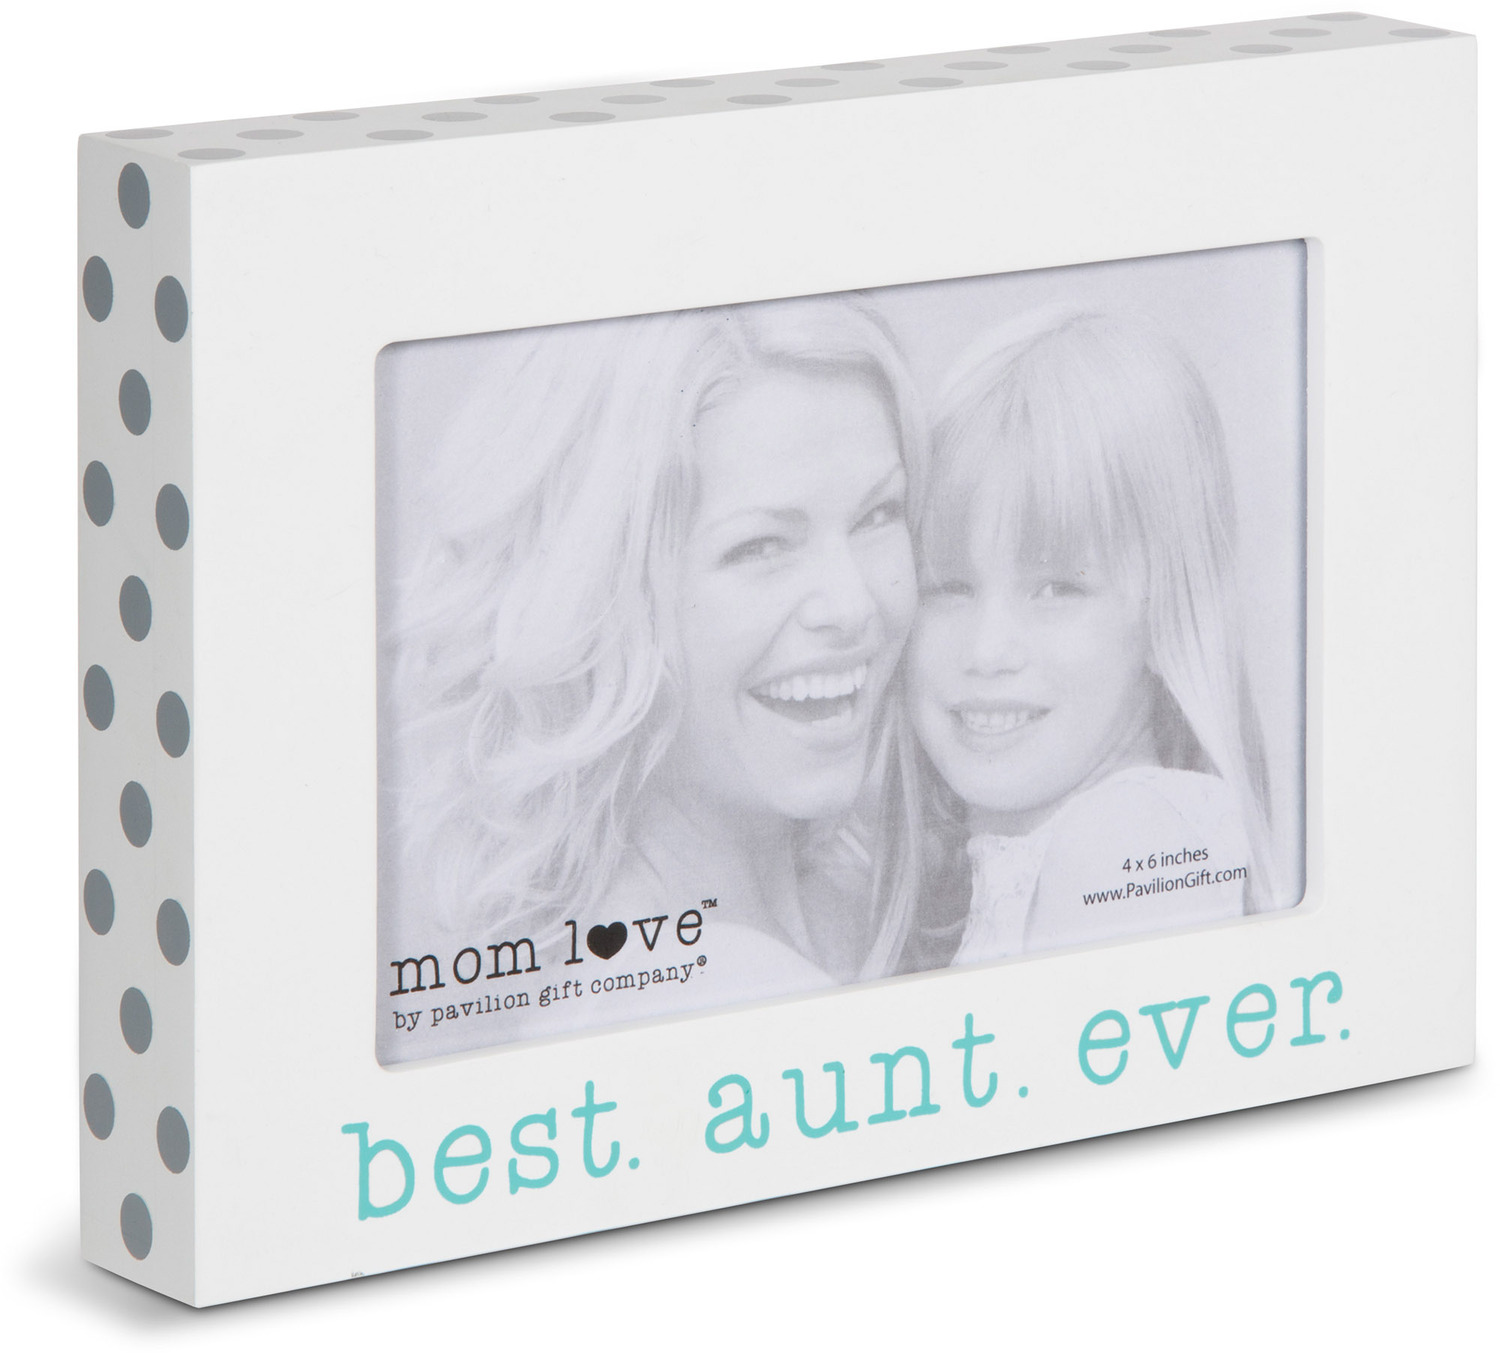 Best Aunt  by Mom Love - Best Aunt  - 7.5" x 5.5" Frame (Holds 4" x 6" Photo)